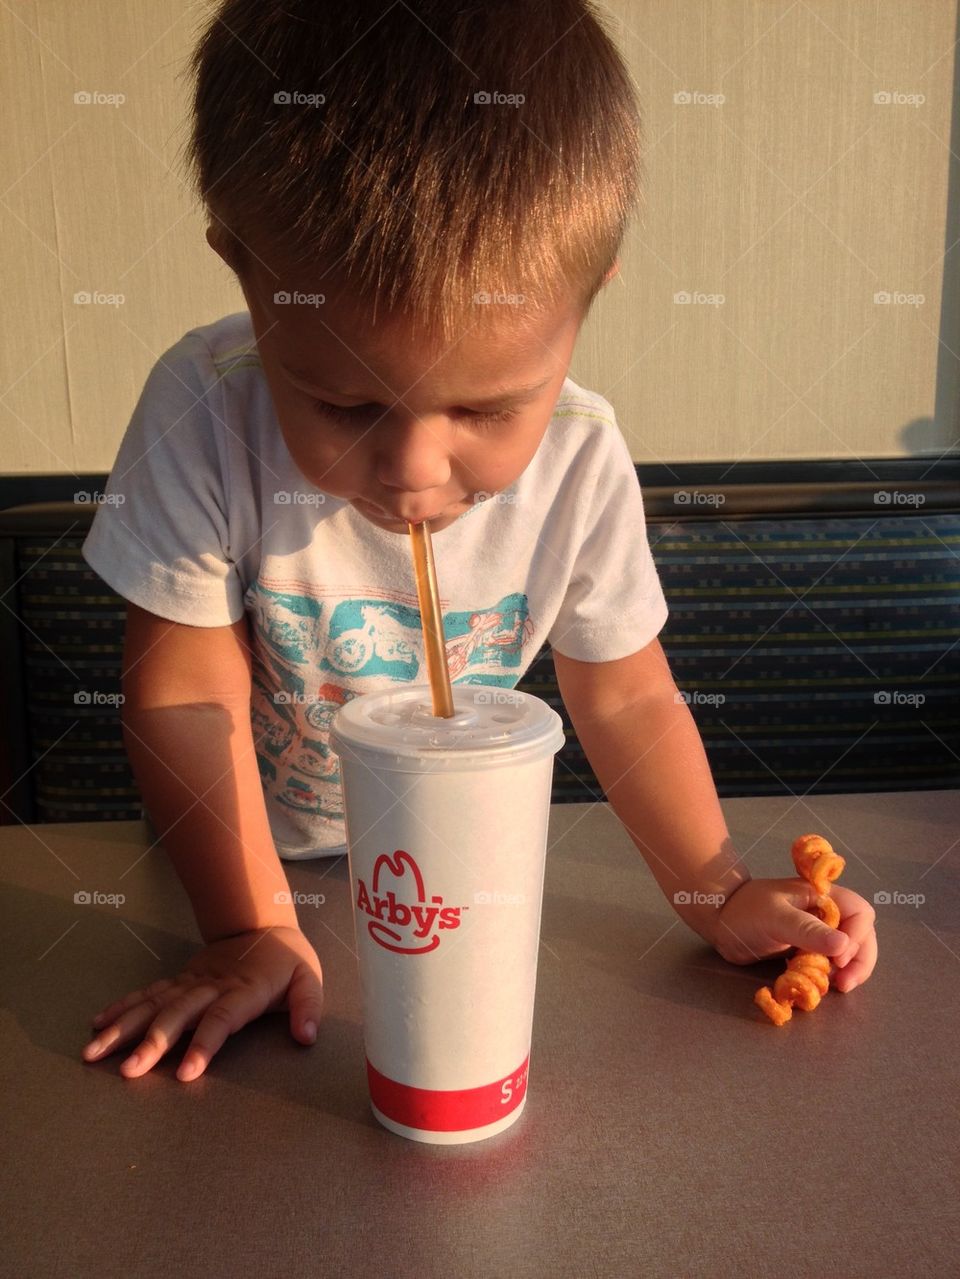 Child enjoying his drink in Arby's 